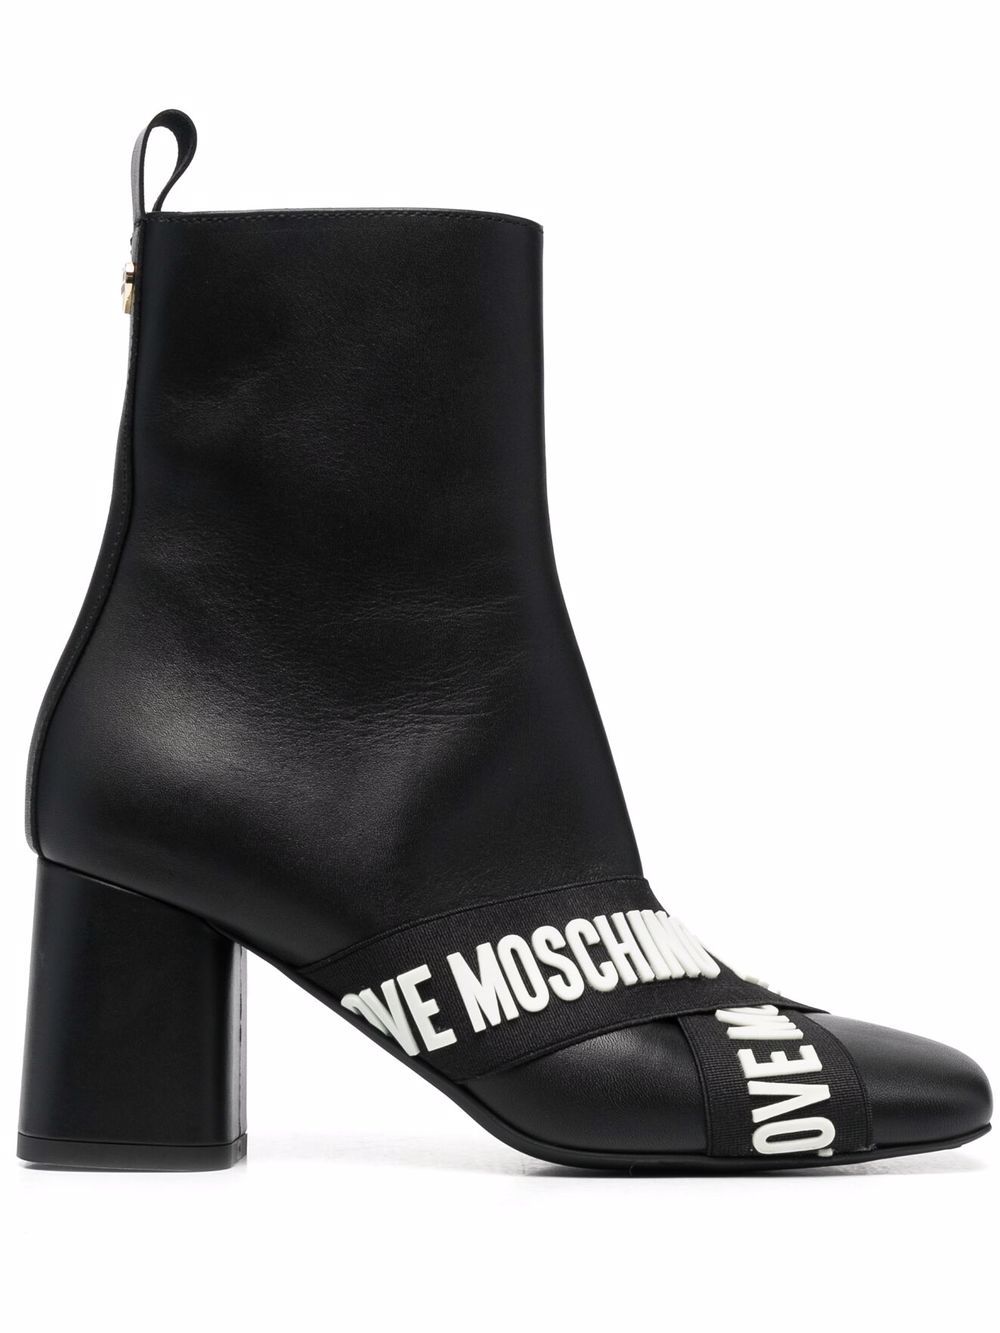 Love Moschino embossed-logo Leather Boots - Farfetch